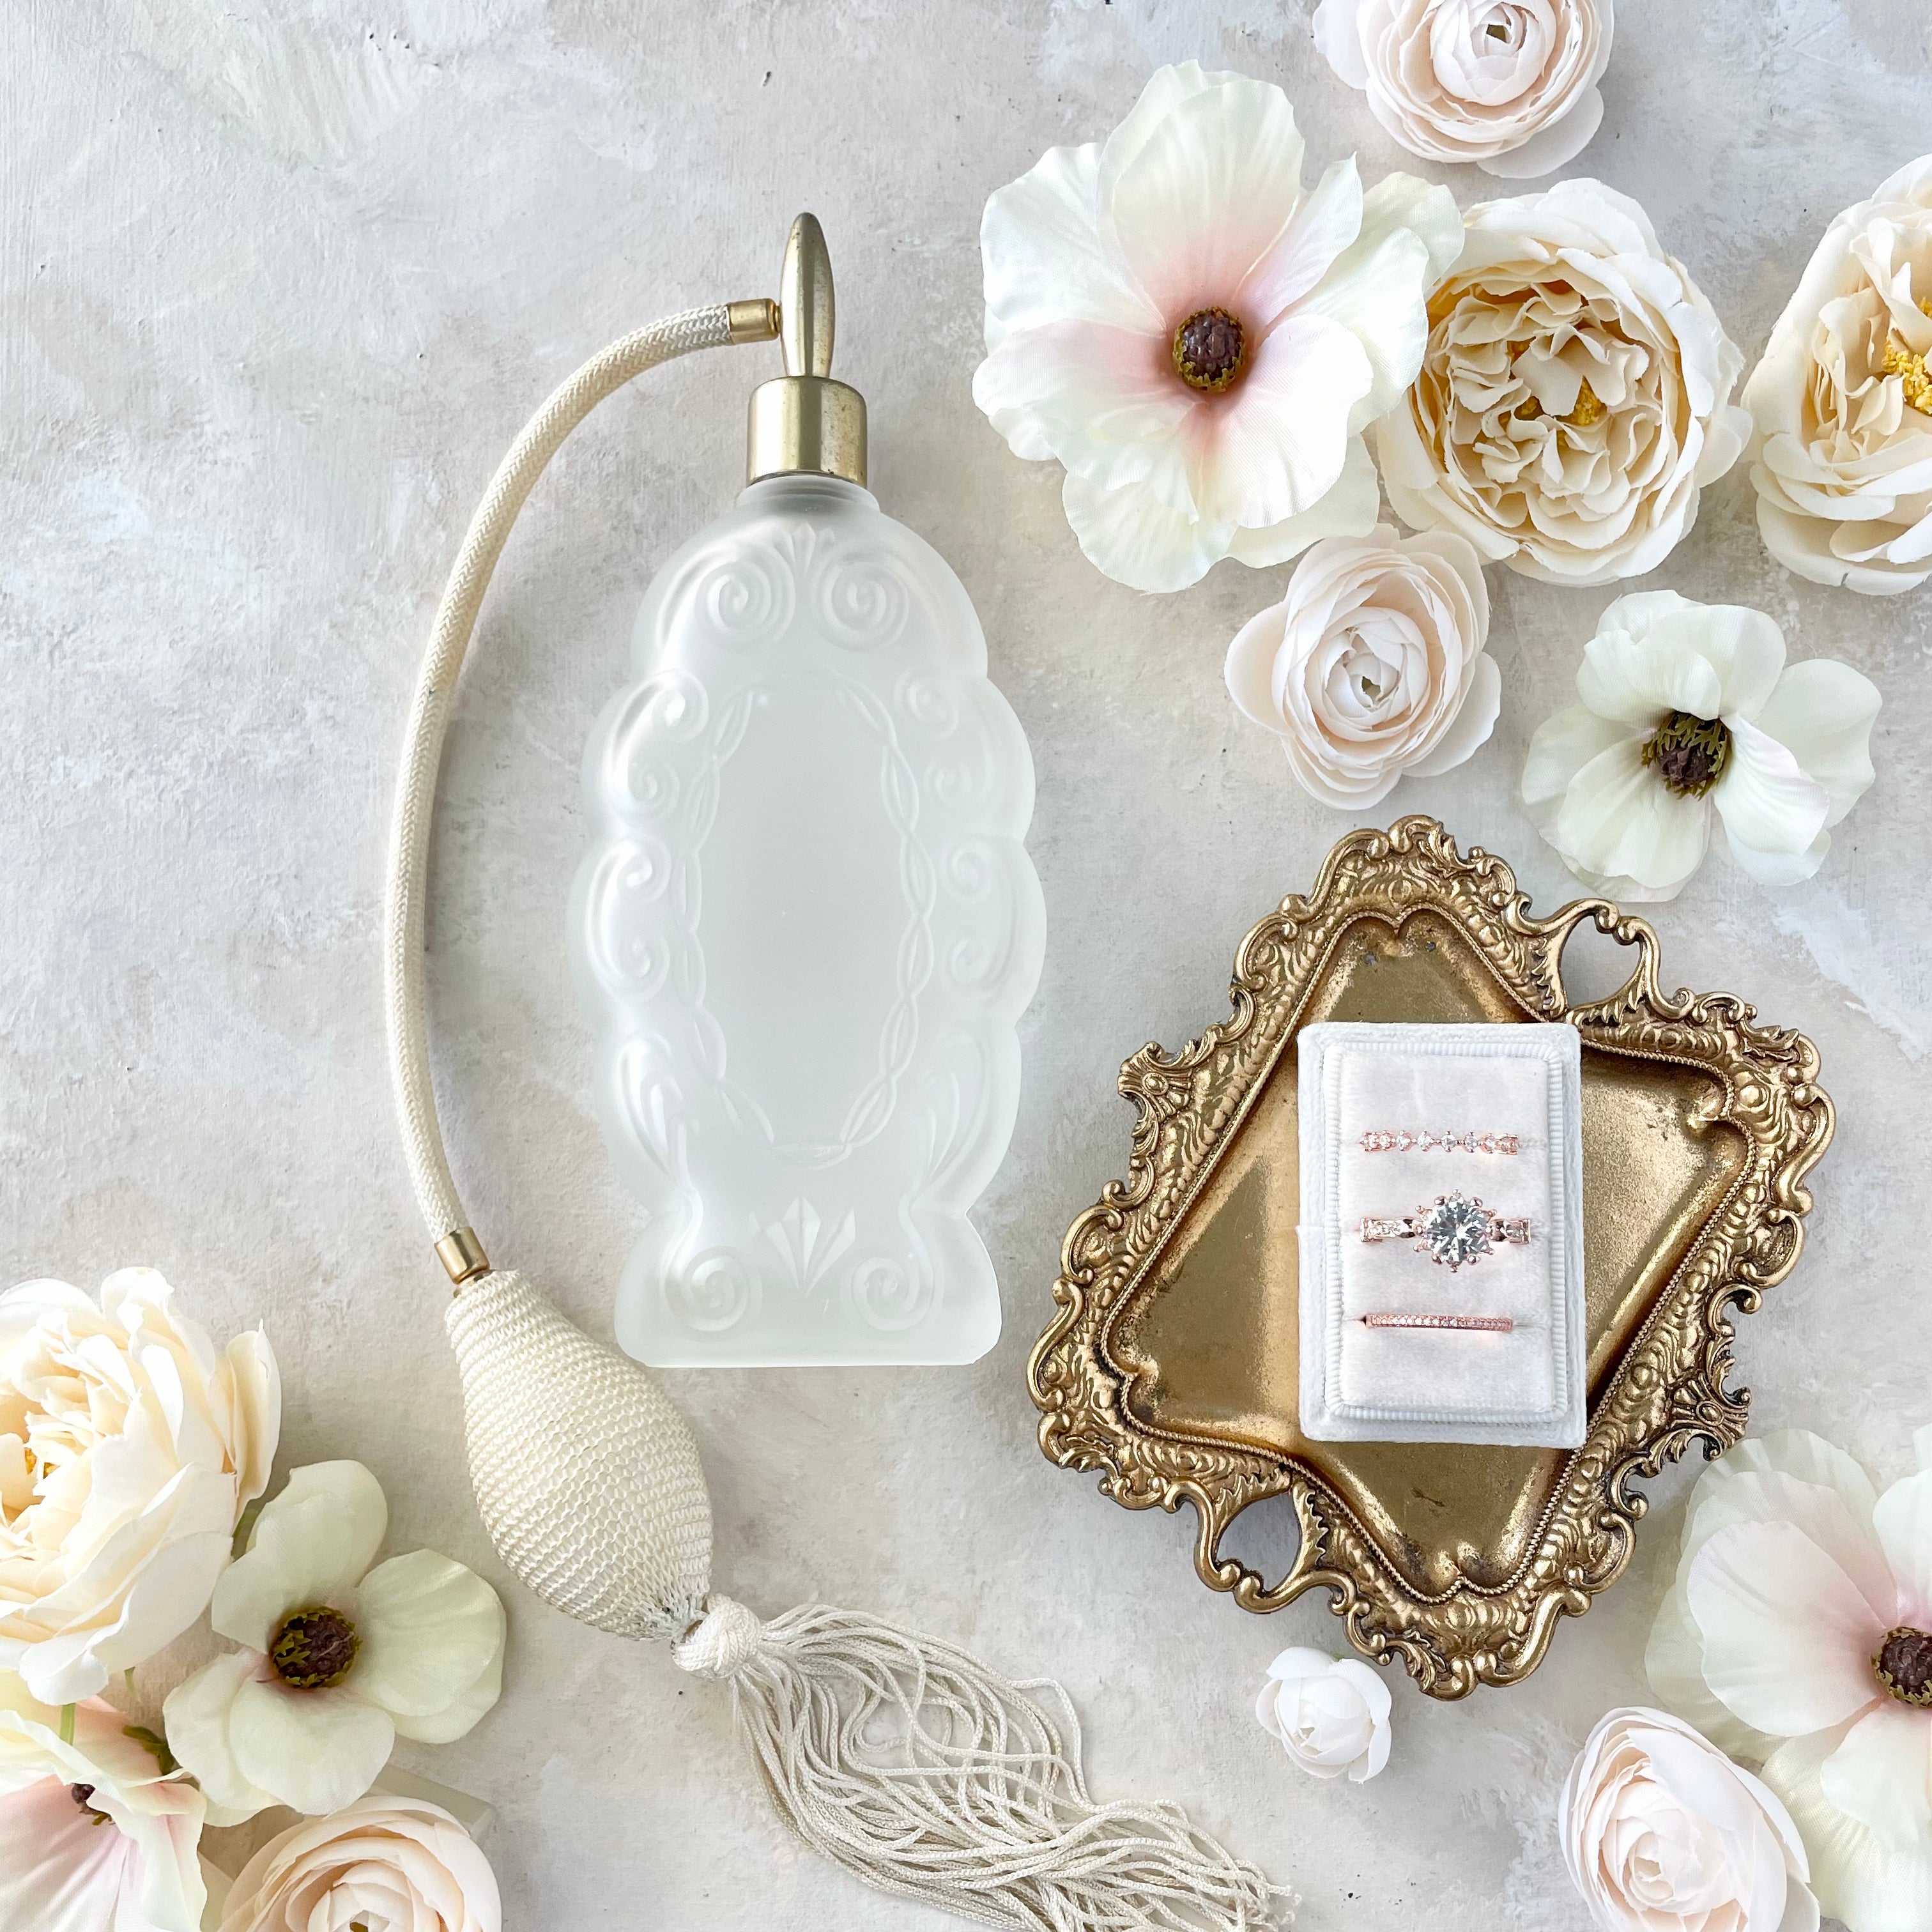 Gold vintage tray for wedding flay lay with white 3 slot ring box, white florals and vintage perfume bottle - Flat Lay Props from Champagne & GRIT